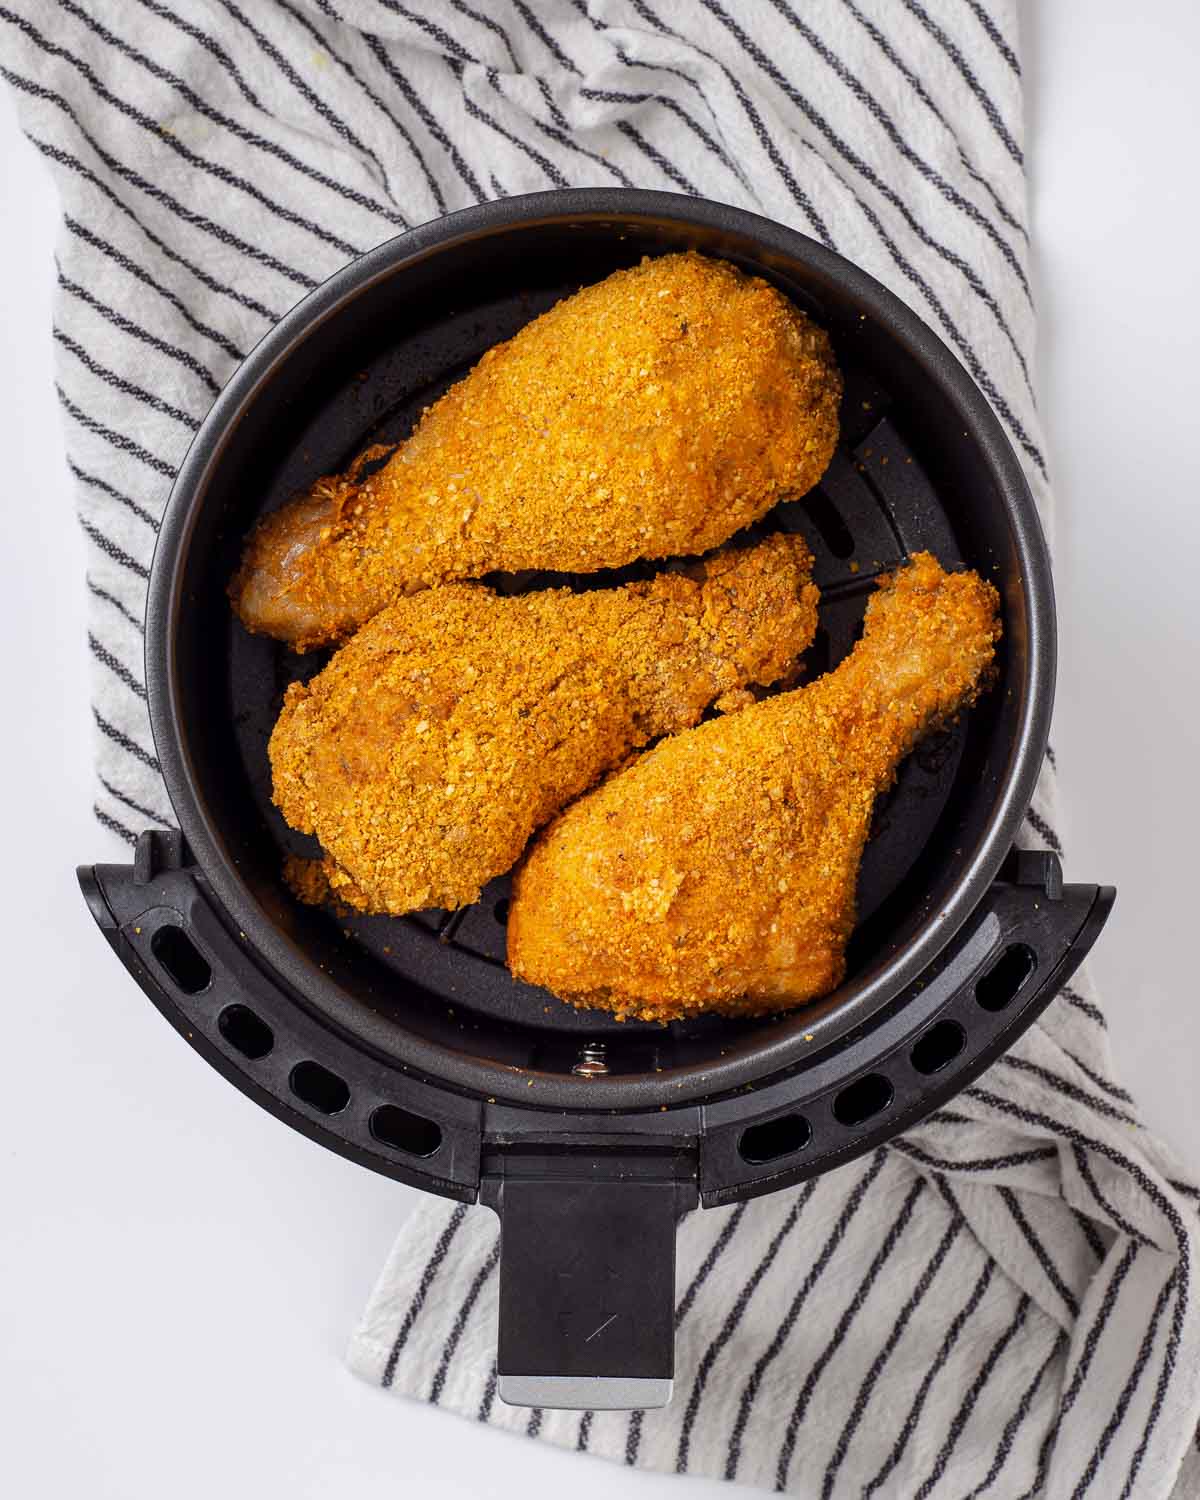 Placing the drumsticks into the air fryer.